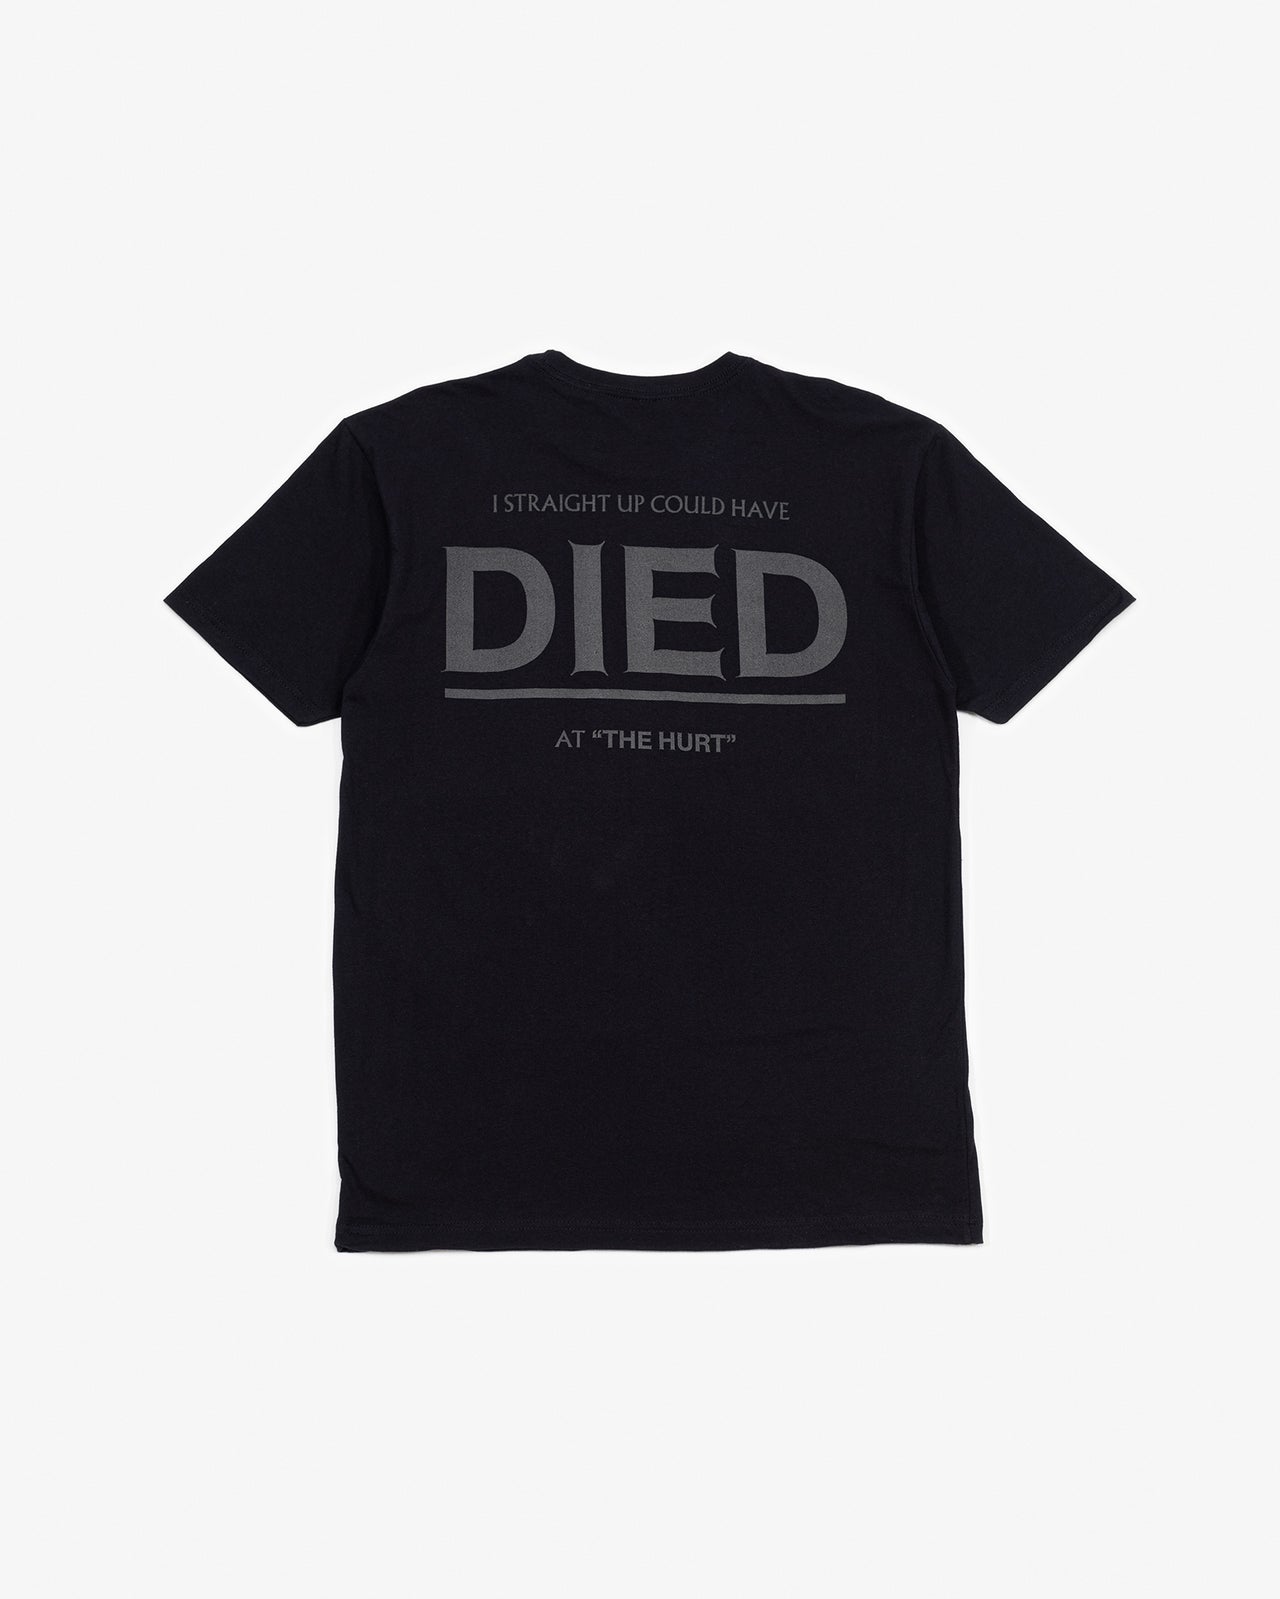 The Hurt 2022 - Could Have Died Tee